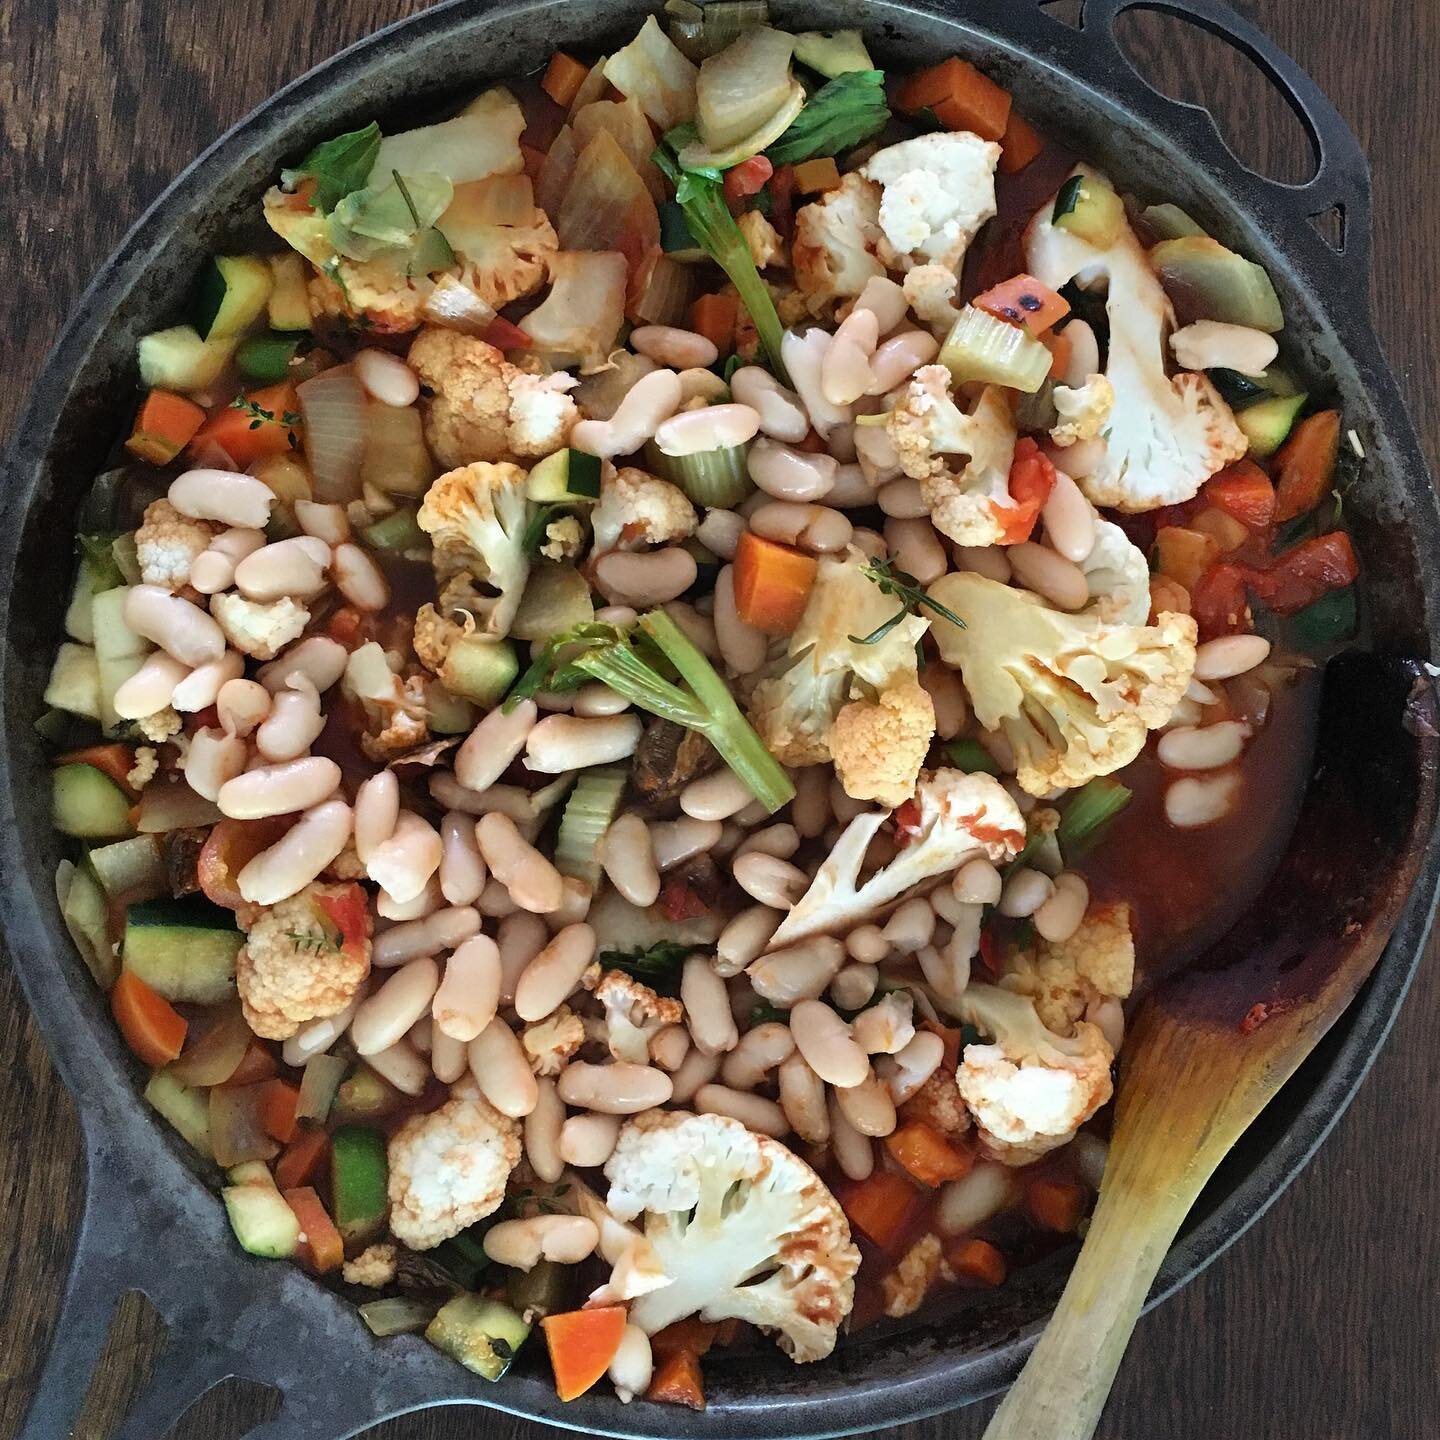 Tuscan White Bean Bake for chilly eves! 
&hellip;.
1 onion
1 small leek 
Couple of garlic cloves
1-2 carrots
A few celery stalks 
Can add a zucchini too!
1/2 a cauliflower
Any greens like silverbeet/rainbow chard/cavolo nero 
A tin of diced tomatoes
